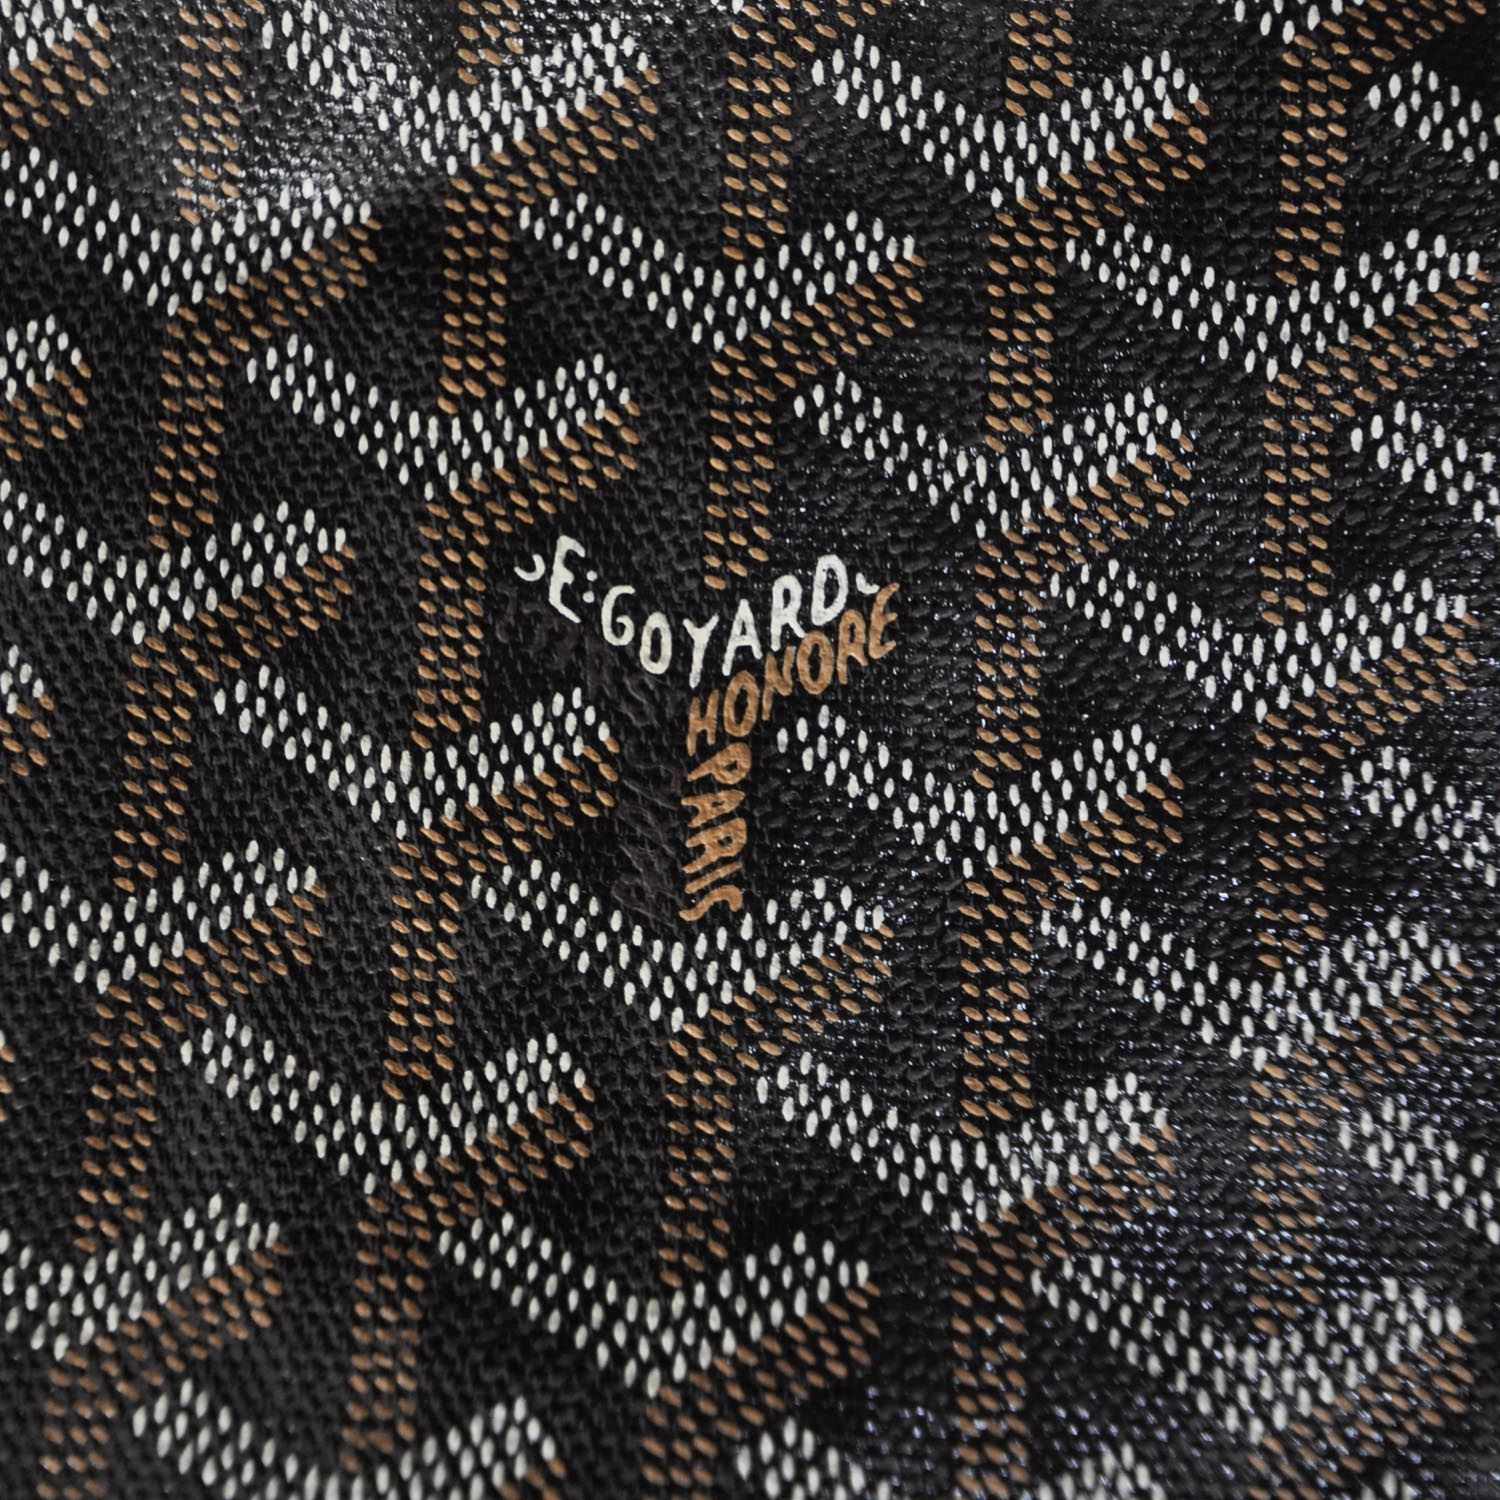 Maison Goyard - The Anjou bag comes in two sizes (PM or GM) and eleven  different Goyardine colors (black, black/tan, white, red, burgundy, sky  blue, navy, orange, yellow, green, grey) and milled